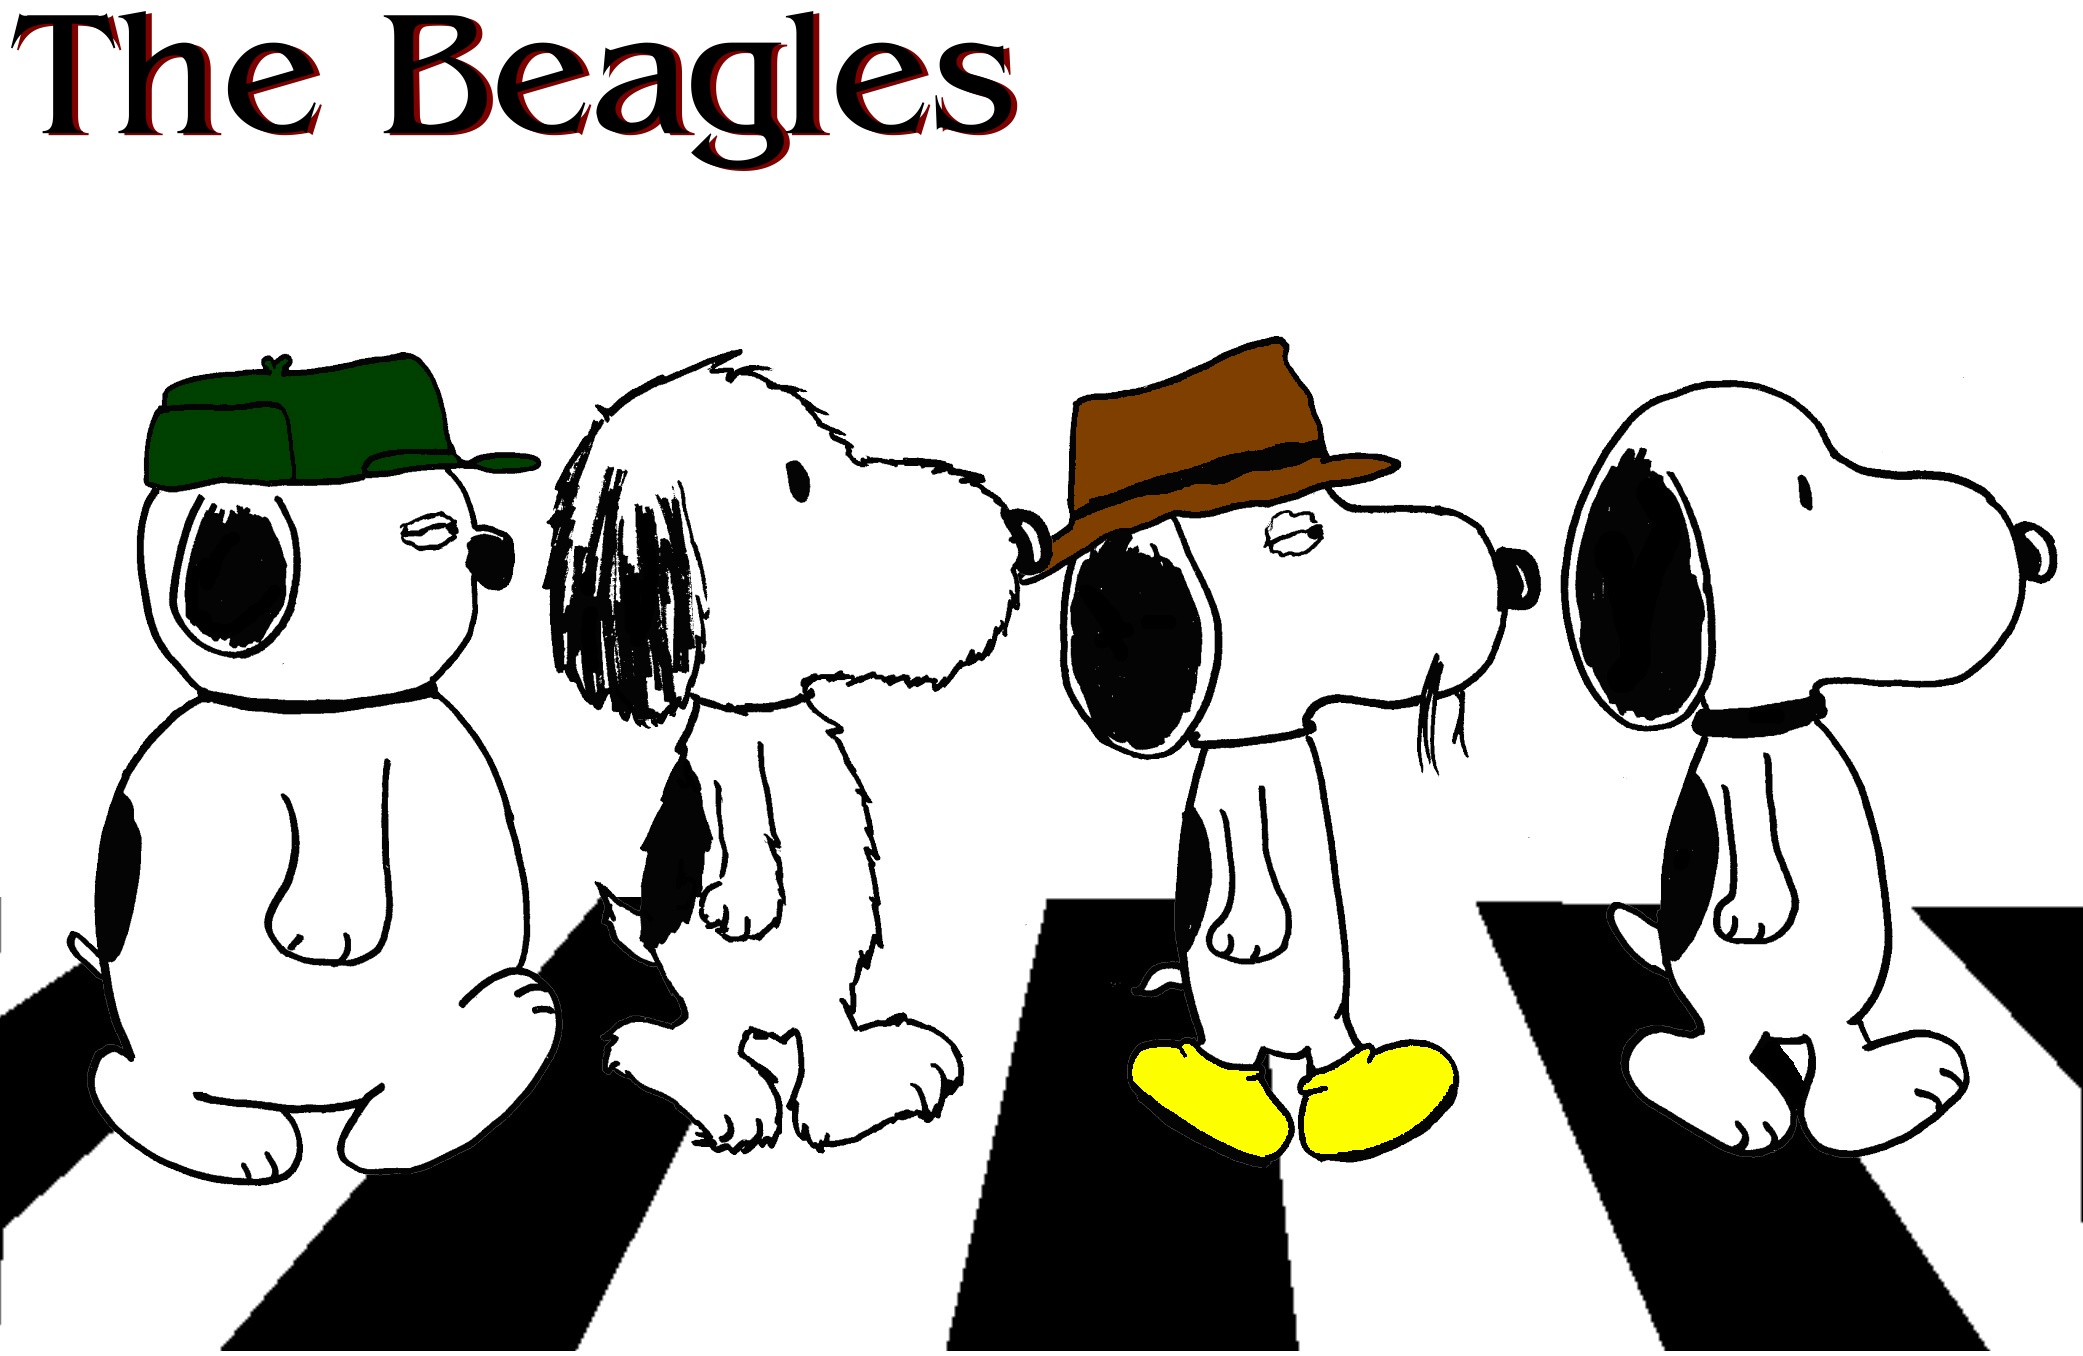 The Beagles by Hermione13